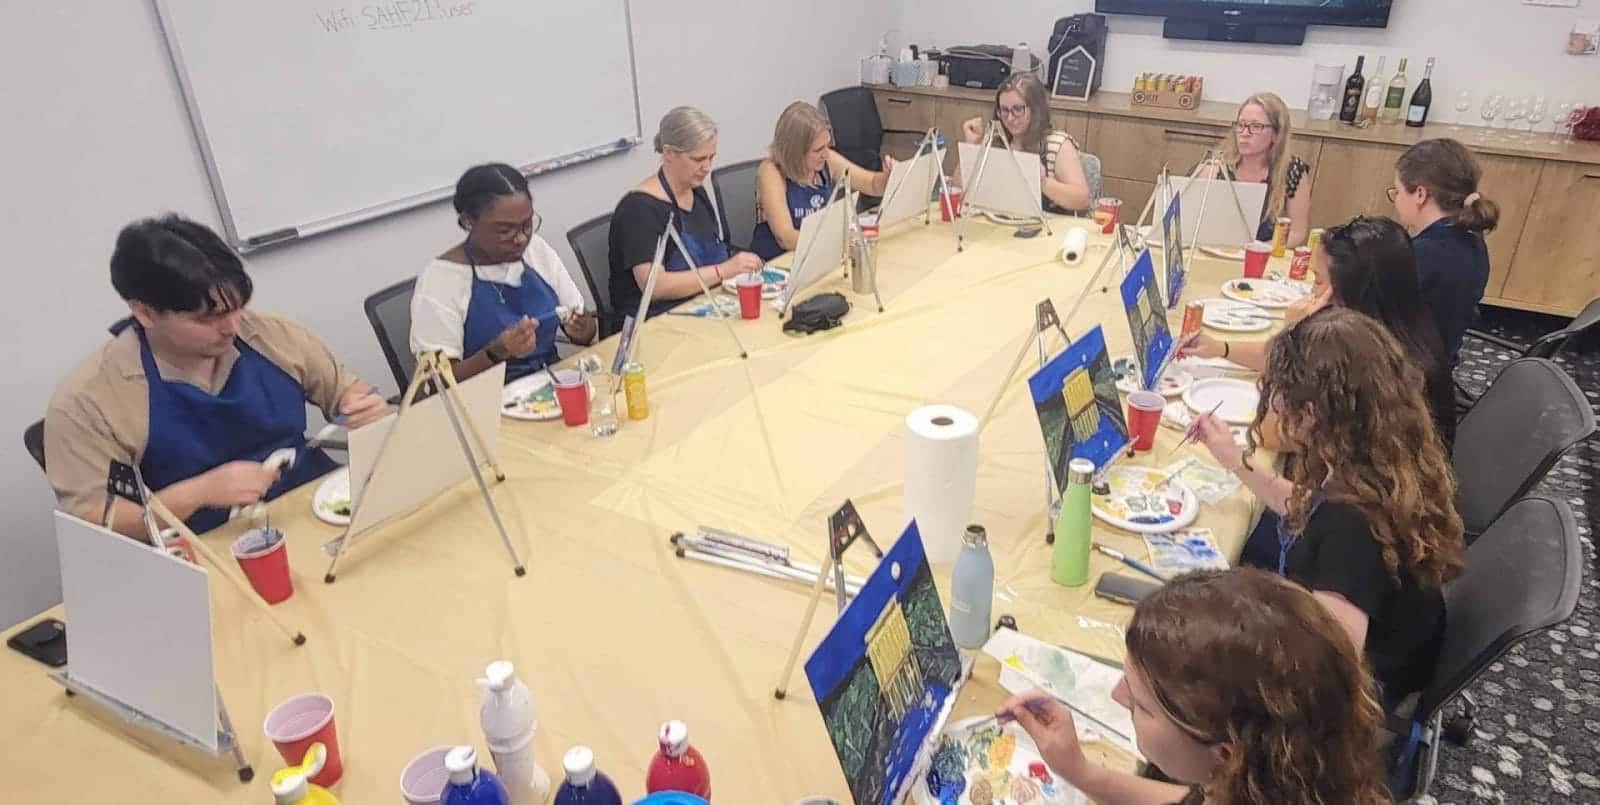 A group of people enjoying a dc sip and paint session at a restaurant table.